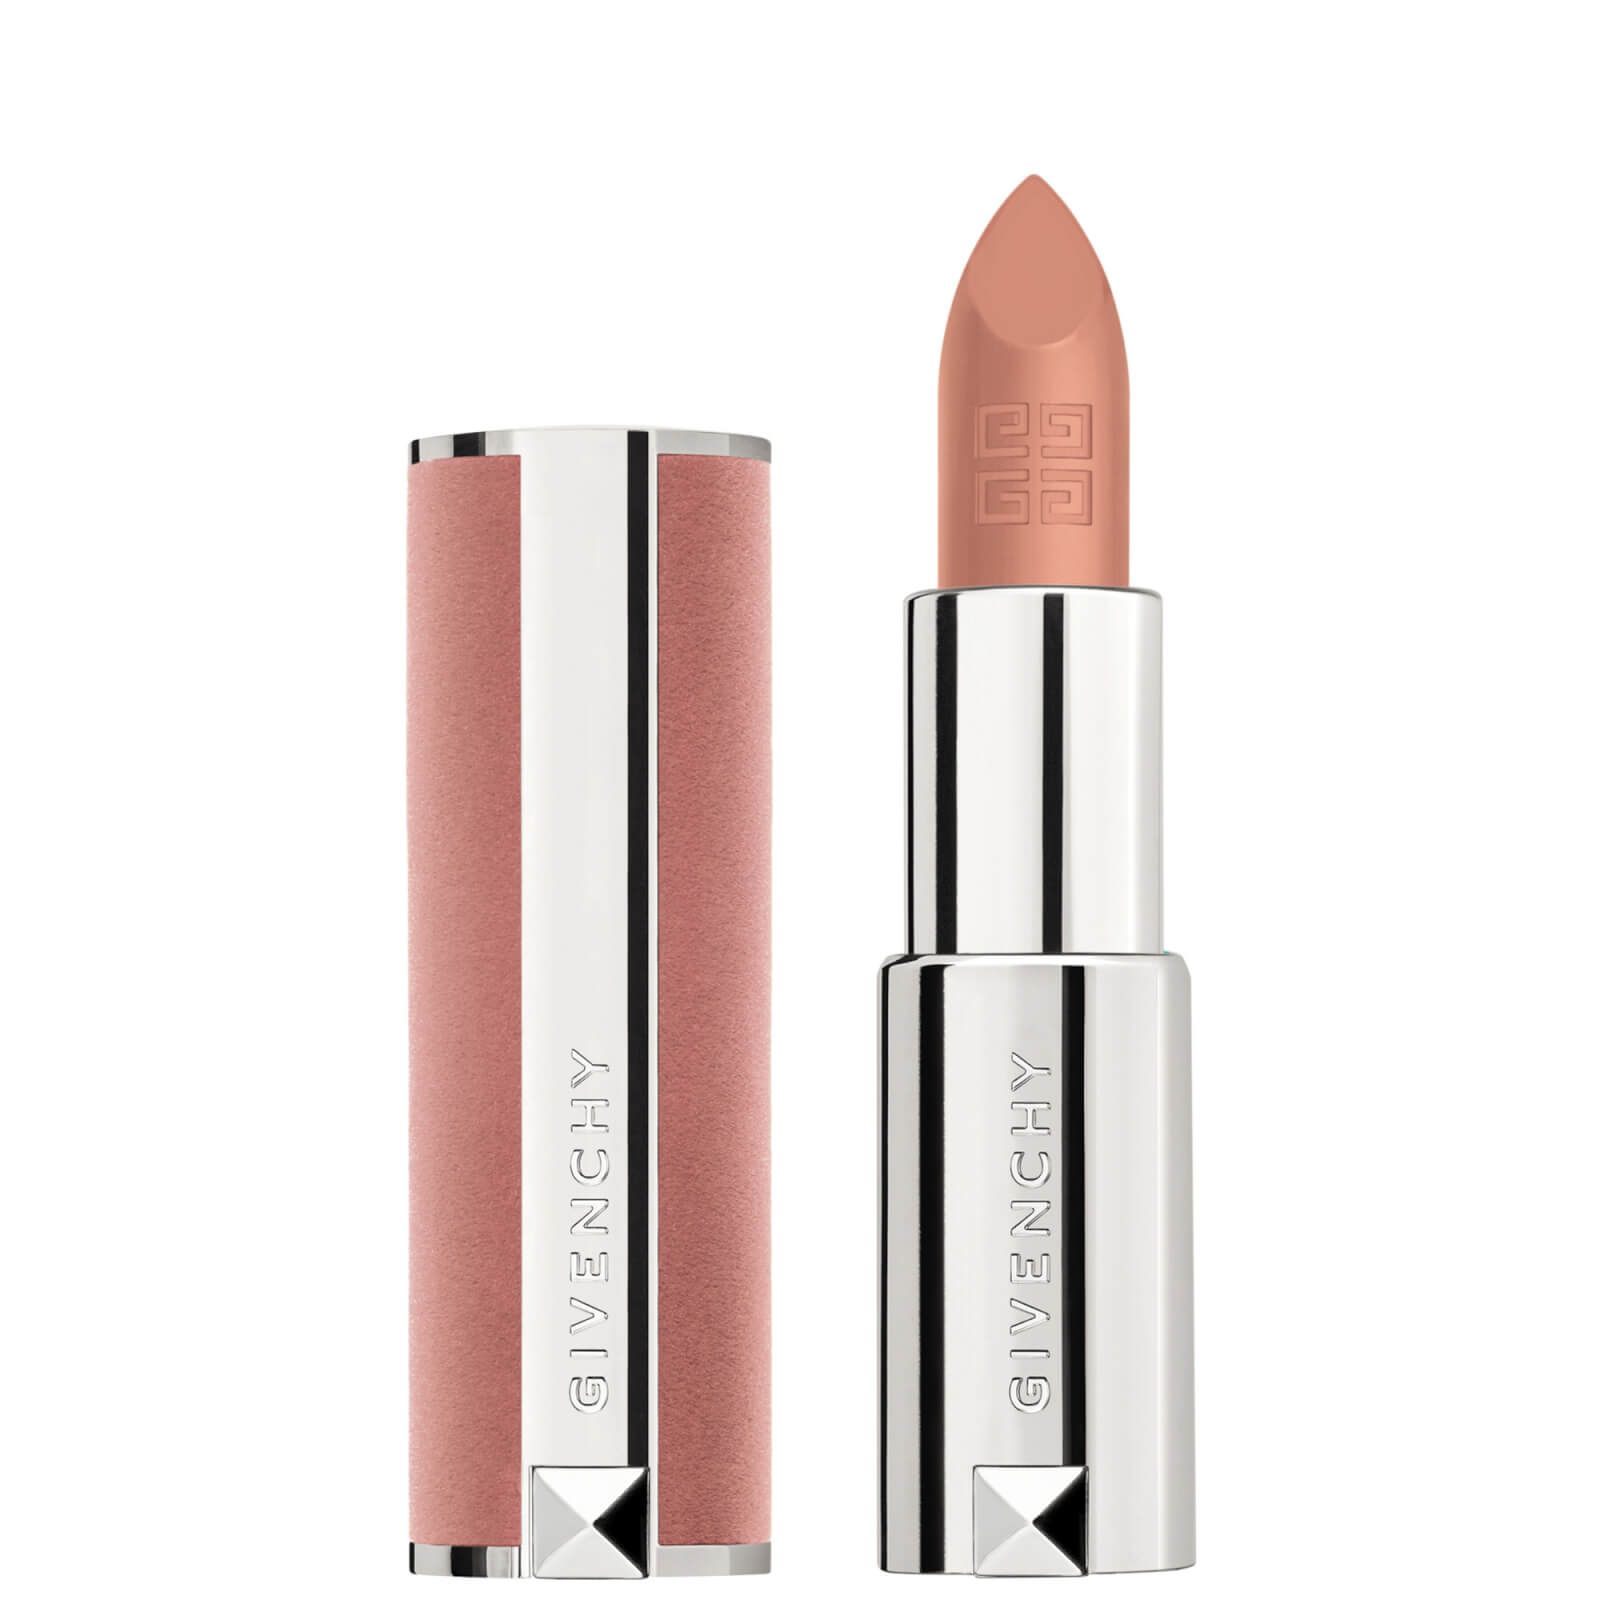 Givenchy Le Rouge Sheer Velvet Lipstick 3.4g (Various Shades) - Beige Sable